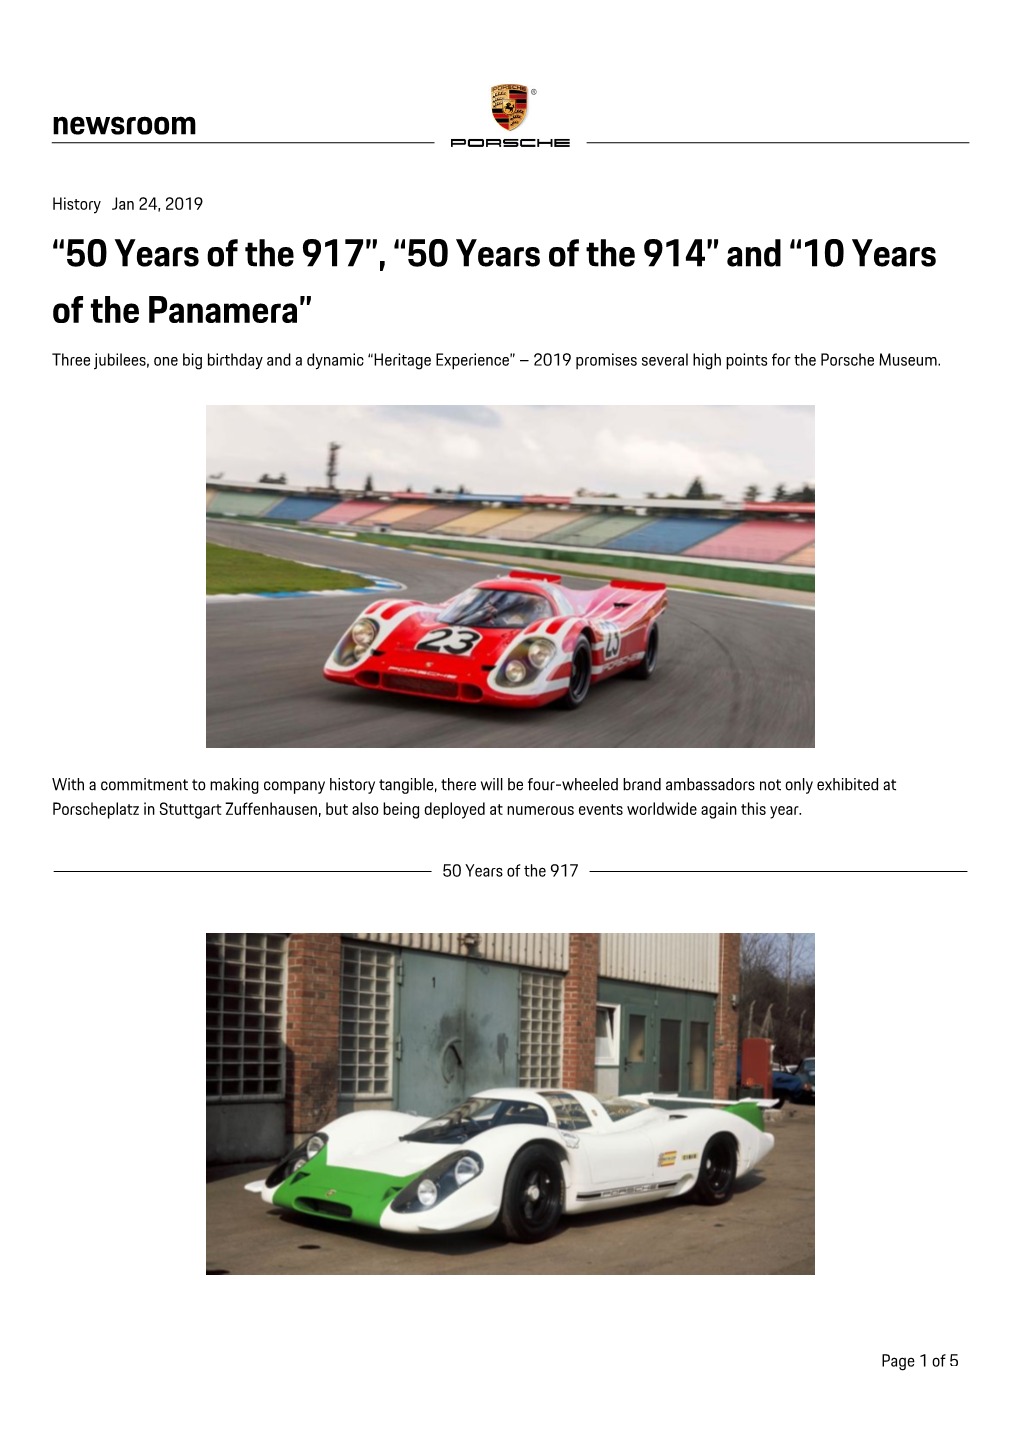 “50 Years of the 914” and “10 Years of the Panamera”